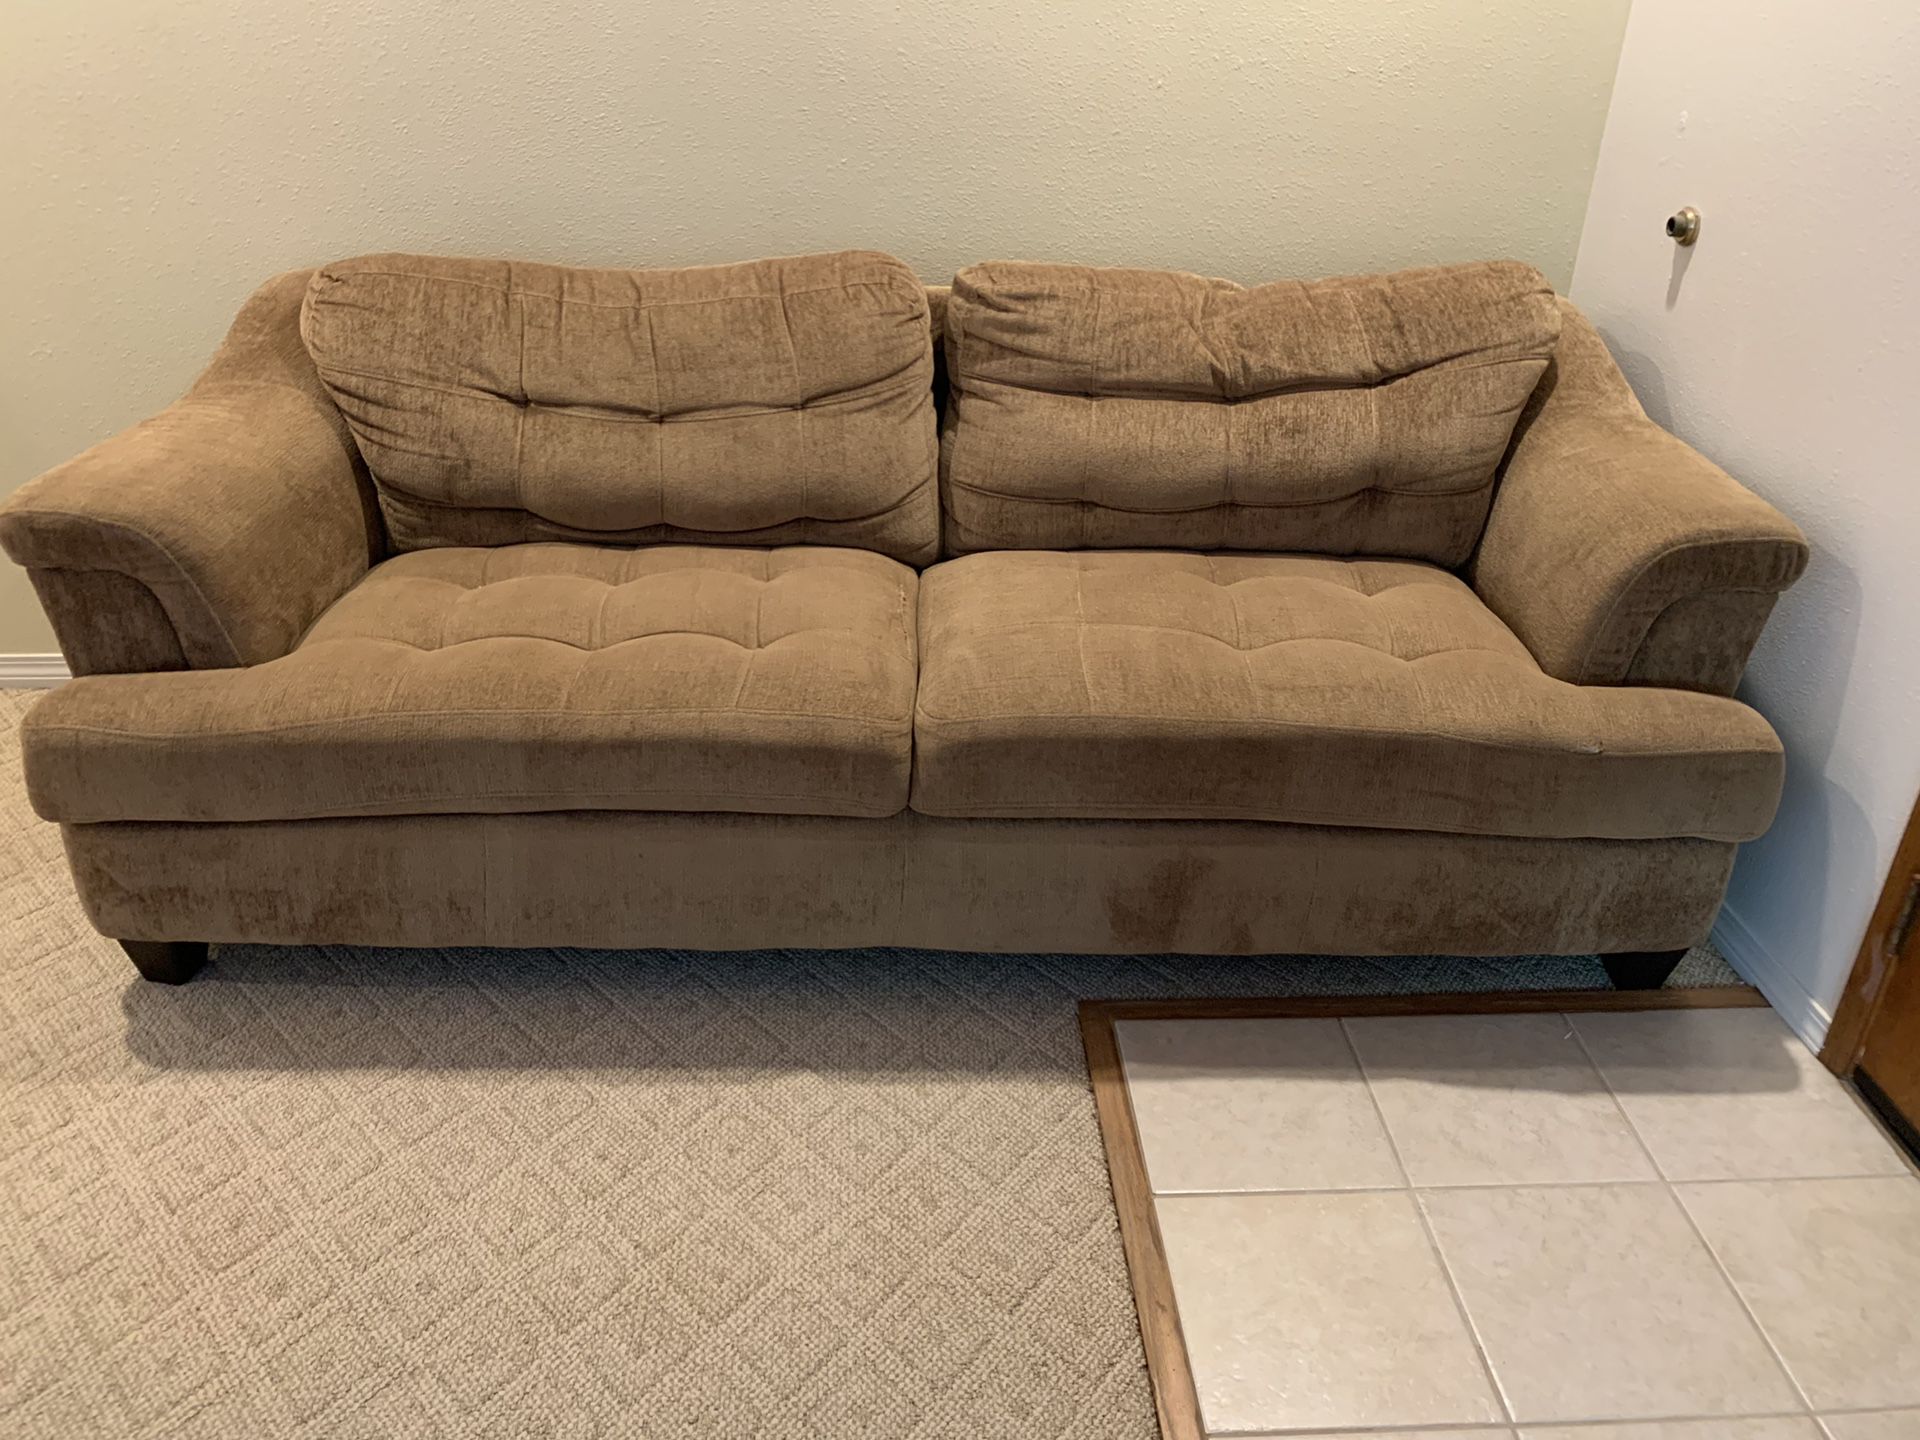 Sofa for $50 or best offer!